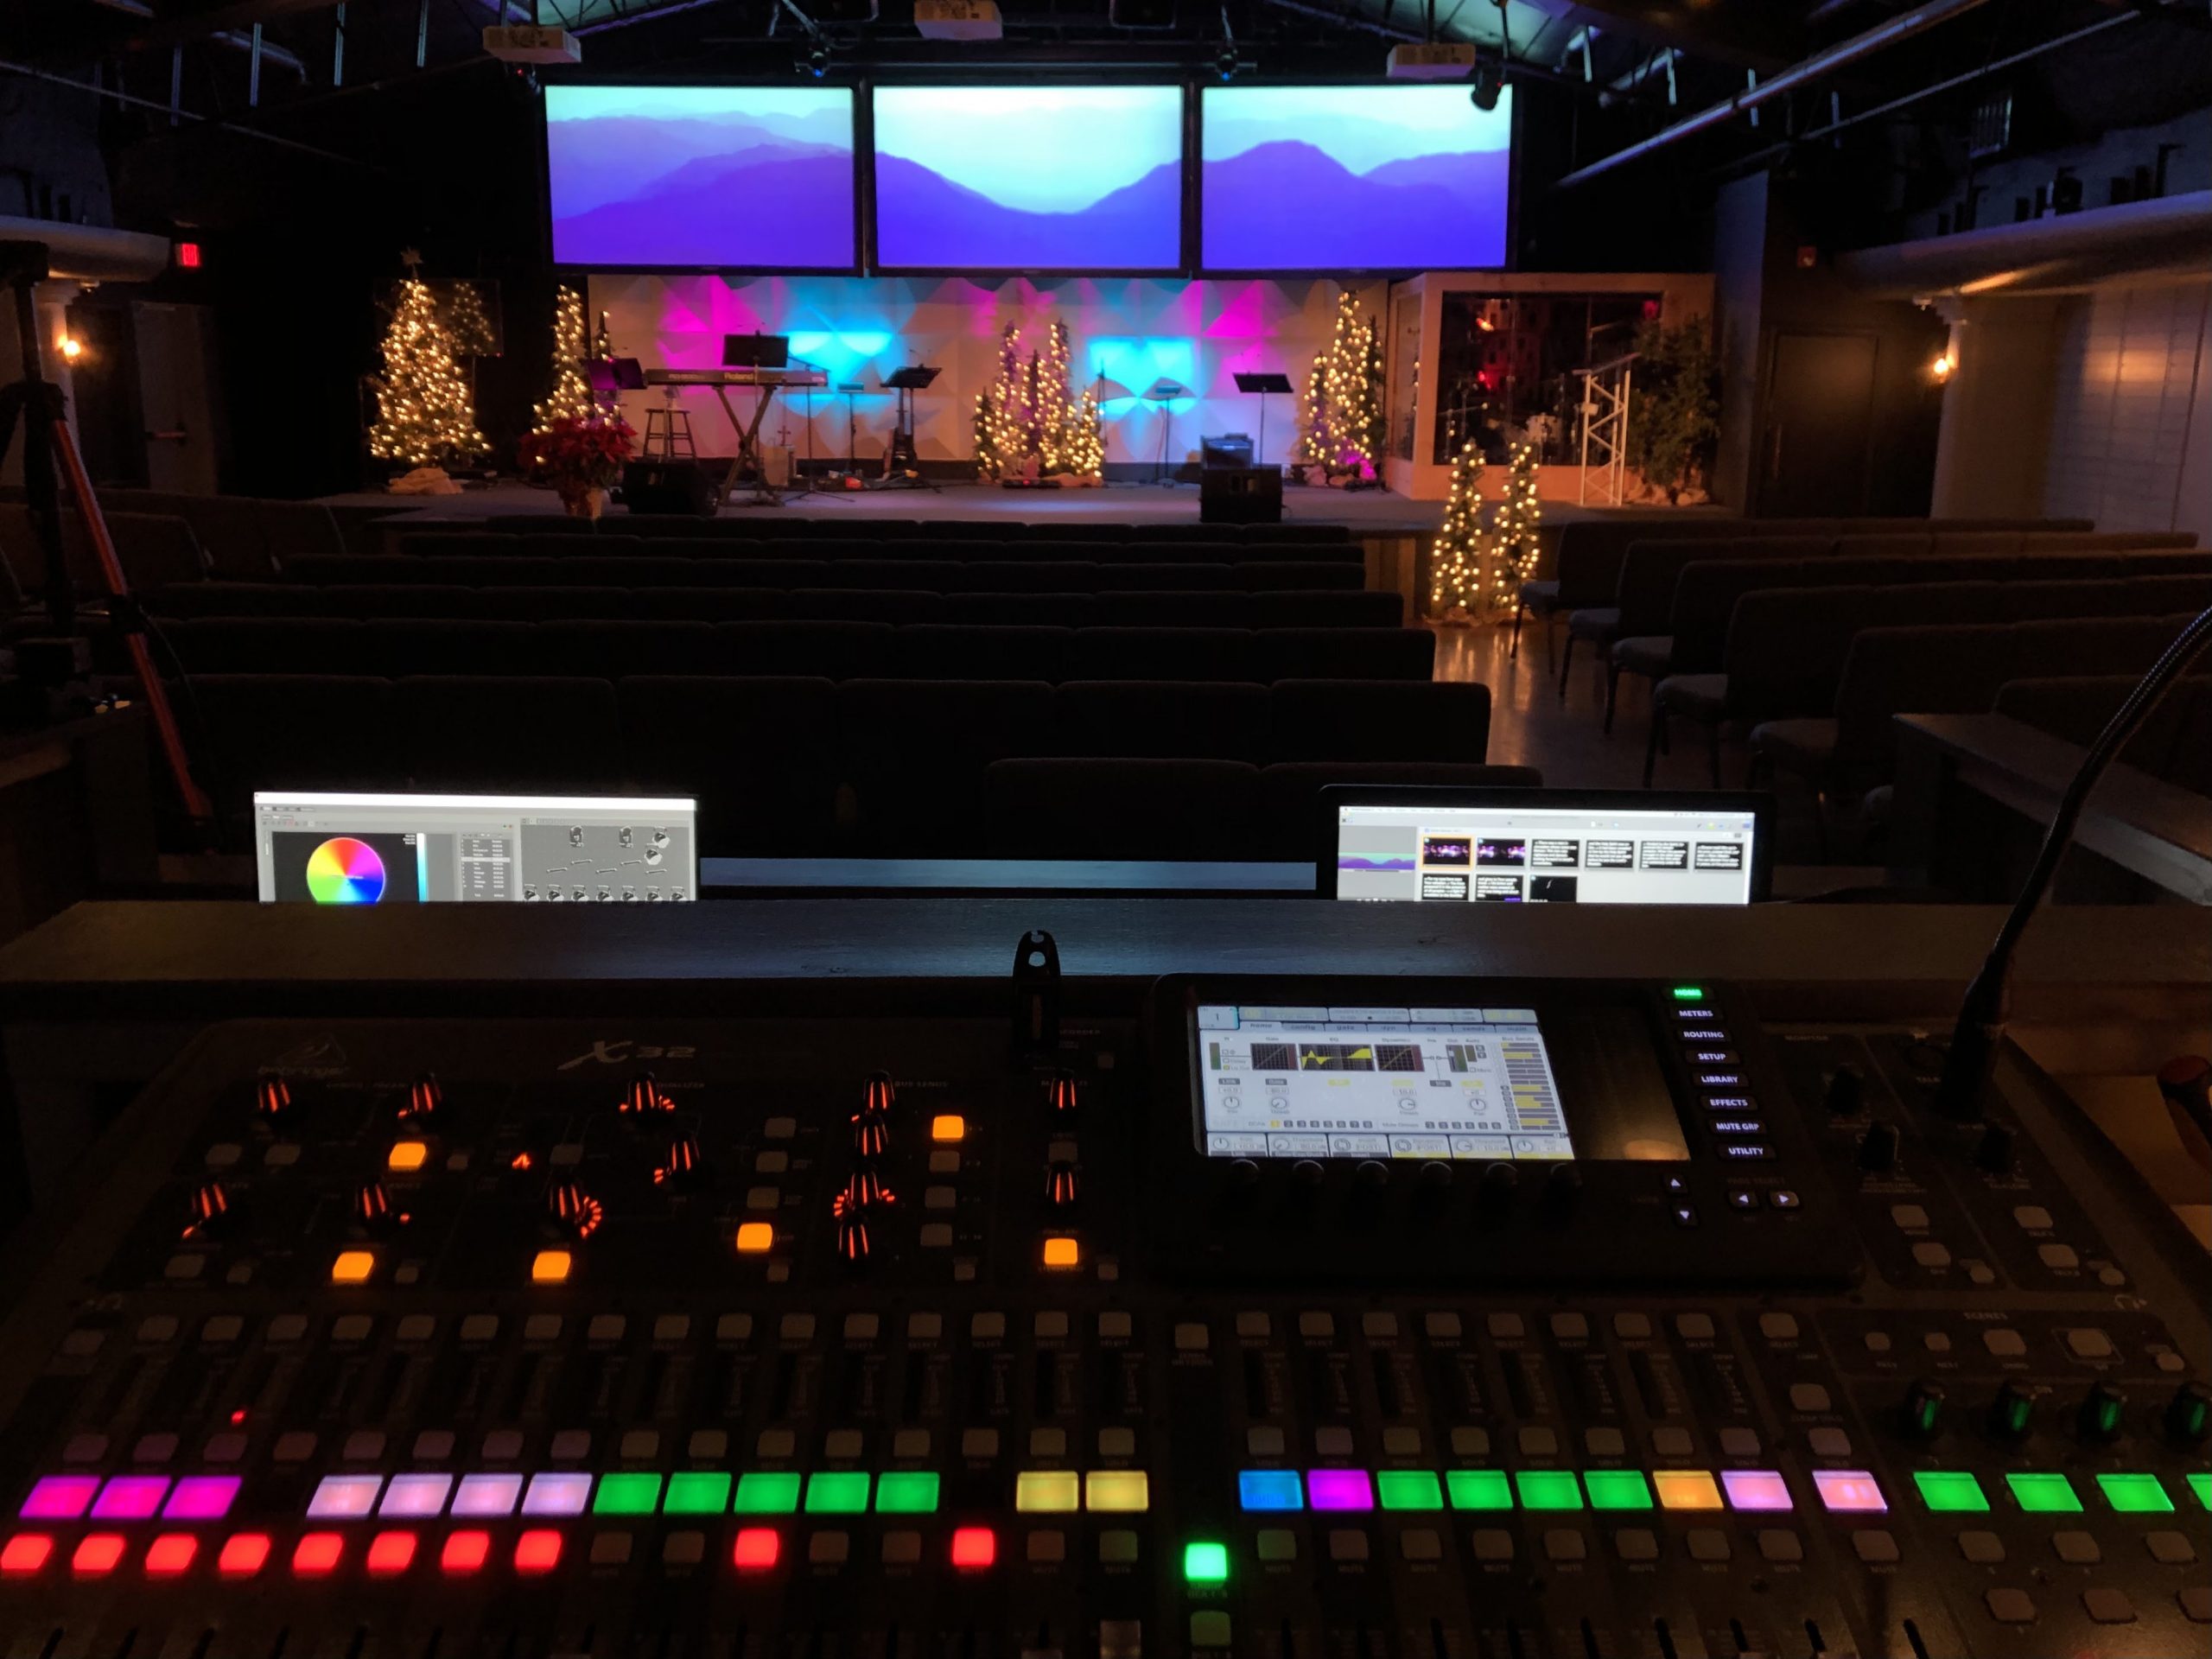 LifeQuest Church Finds “Perfect” Projector to Fit Its Needs With Maxell Pro AV